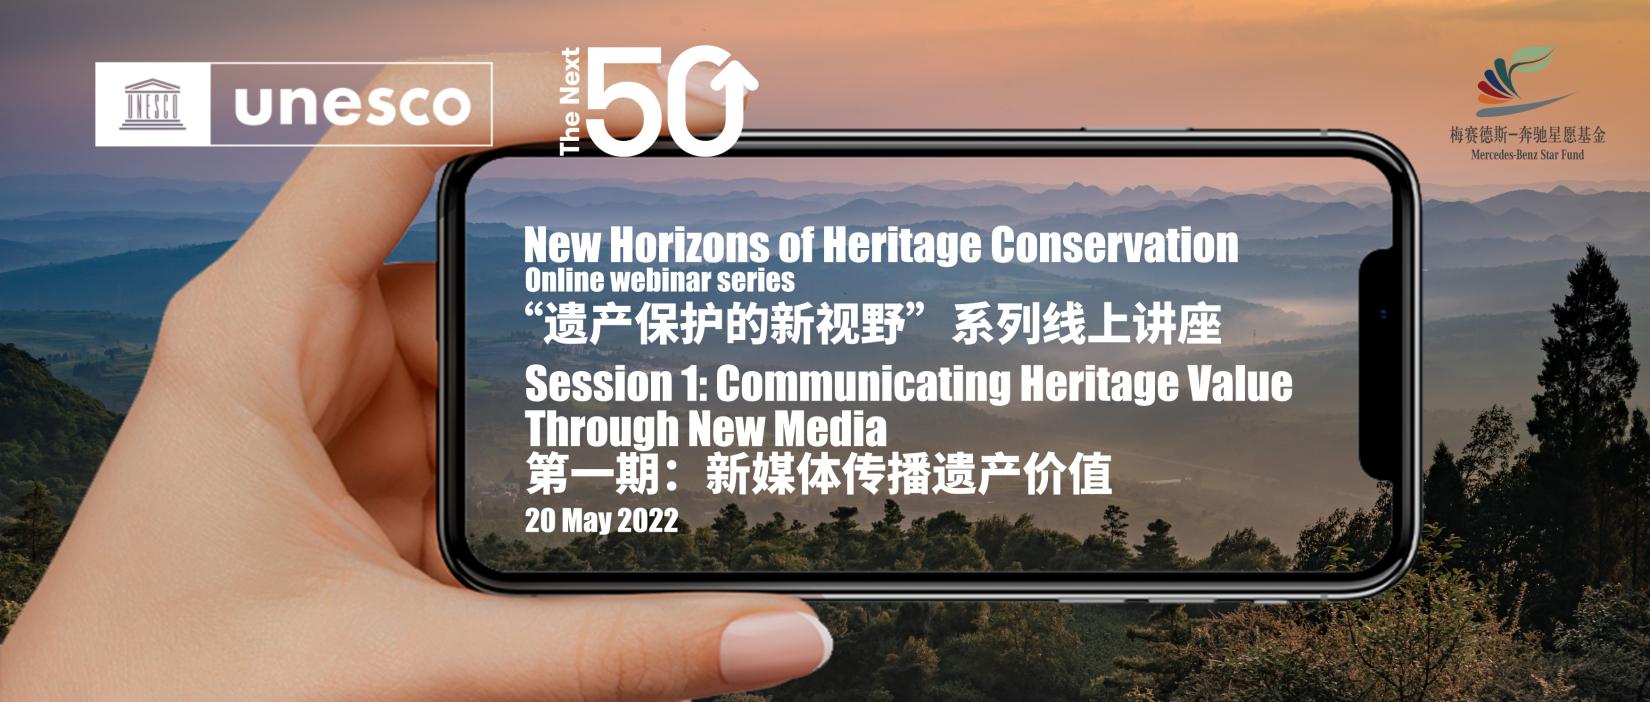 First Session of “New Horizons of Heritage Conservation” Online Webinar Series